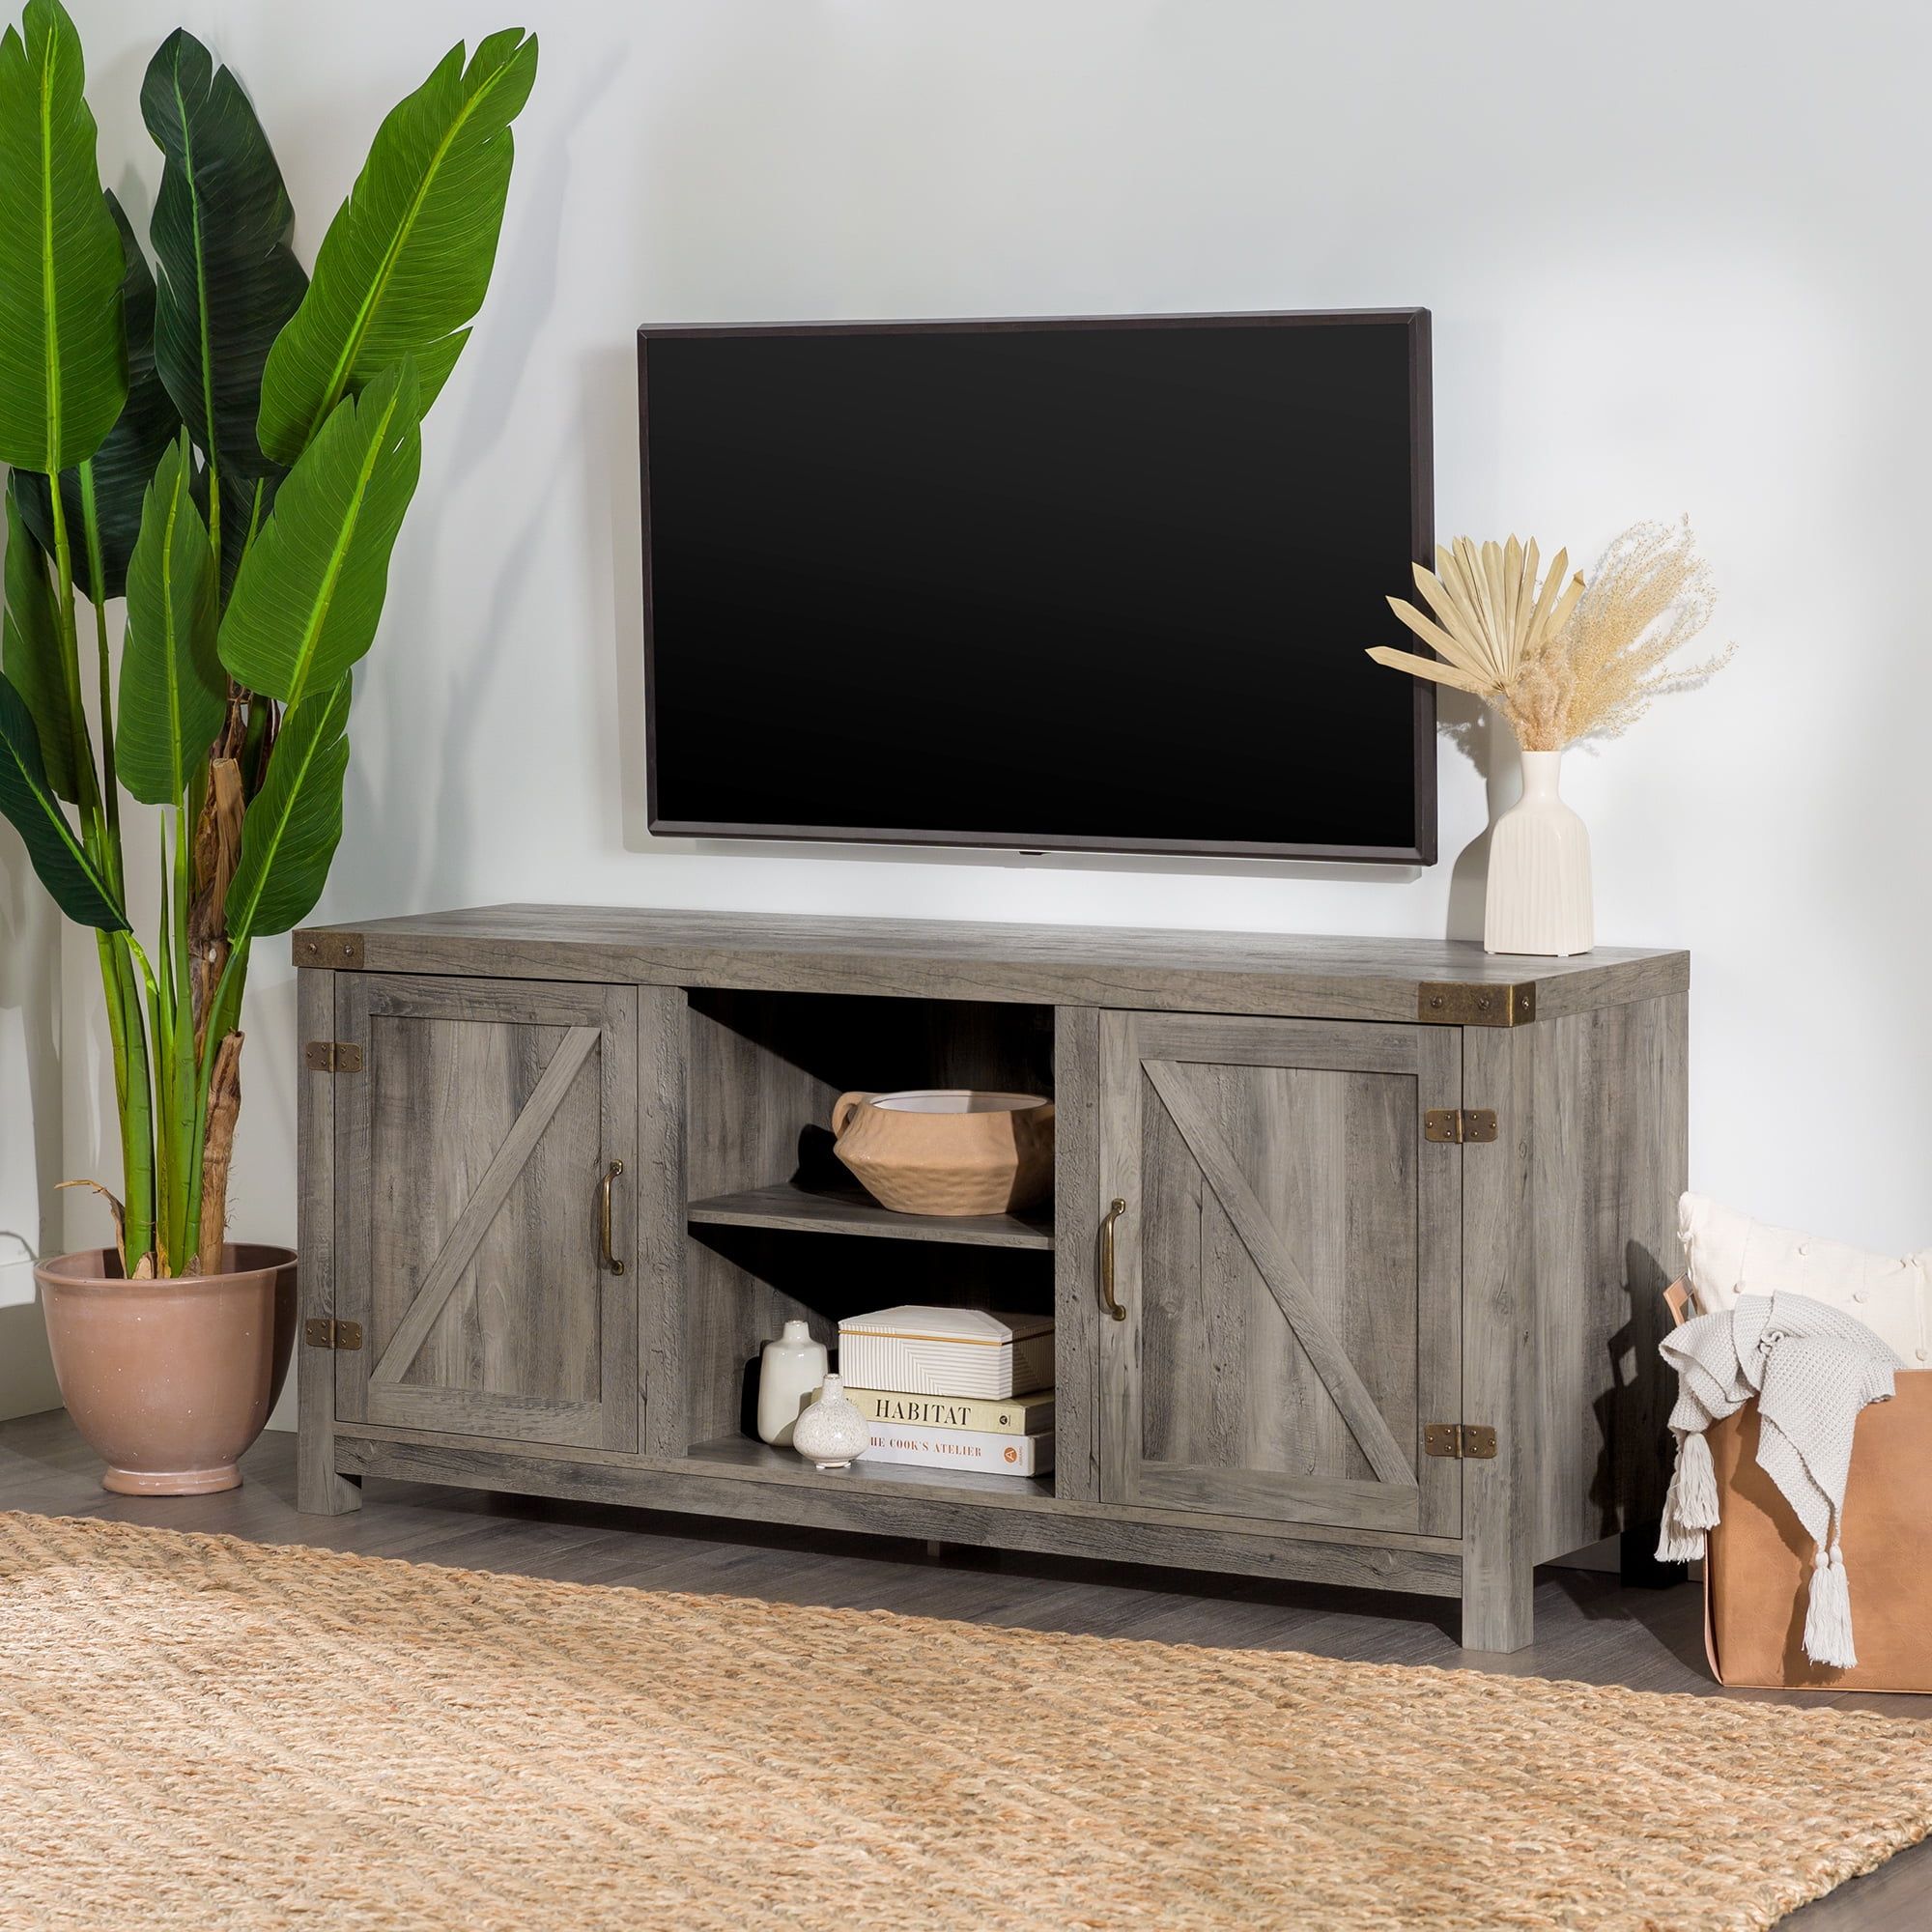 Woven Paths Modern Farmhouse Barn Door Tv Stand For Tvs Up To 65", Grey  Wash – Walmart Pertaining To Farmhouse Stands For Tvs (Photo 4 of 15)